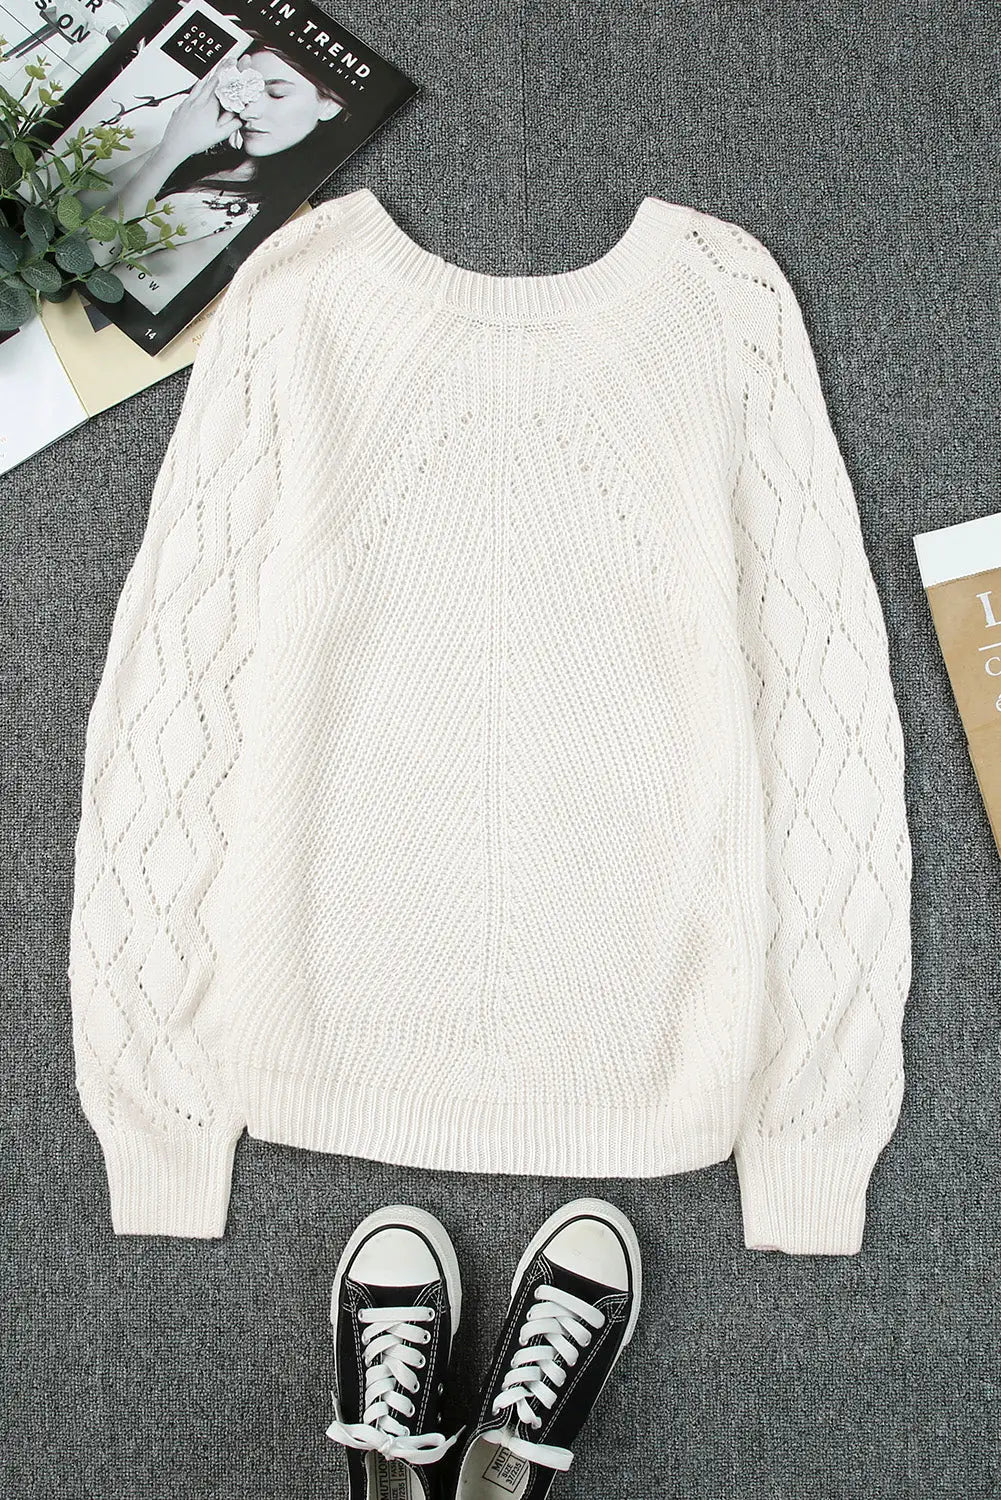 Gray hollow-out puffy sleeve knit sweater - sweaters & cardigans